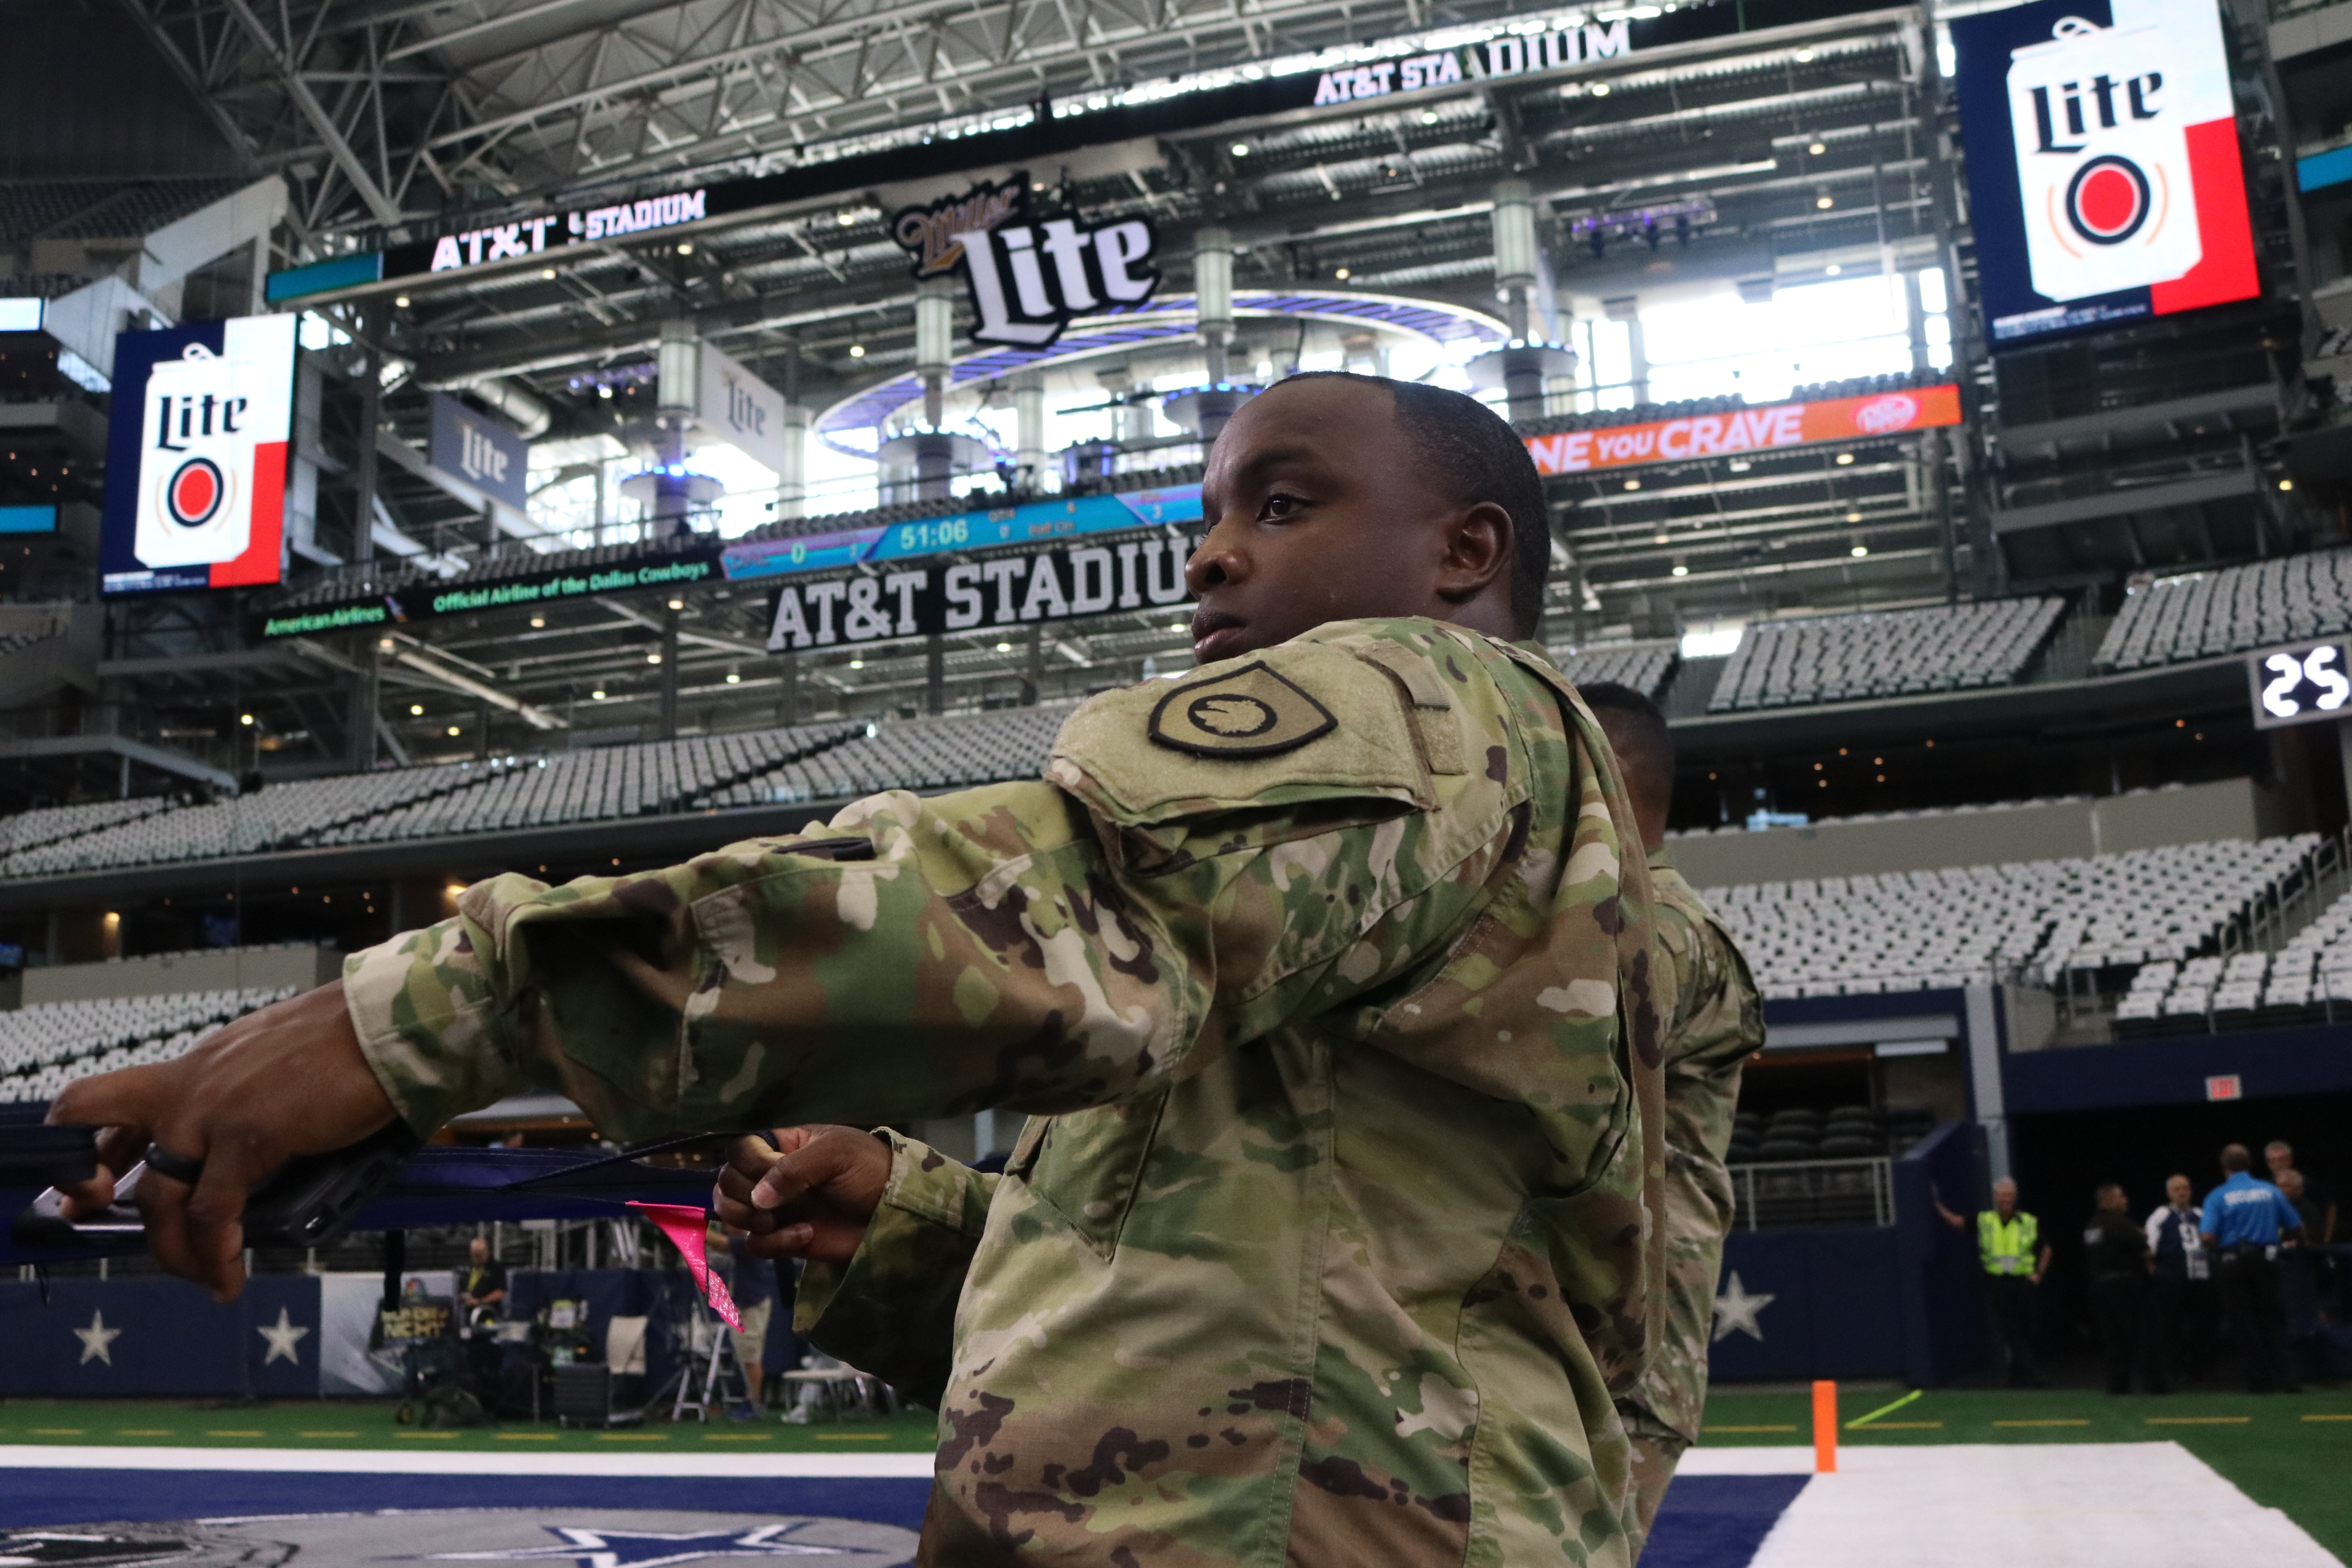 salute to service cowboys 2018